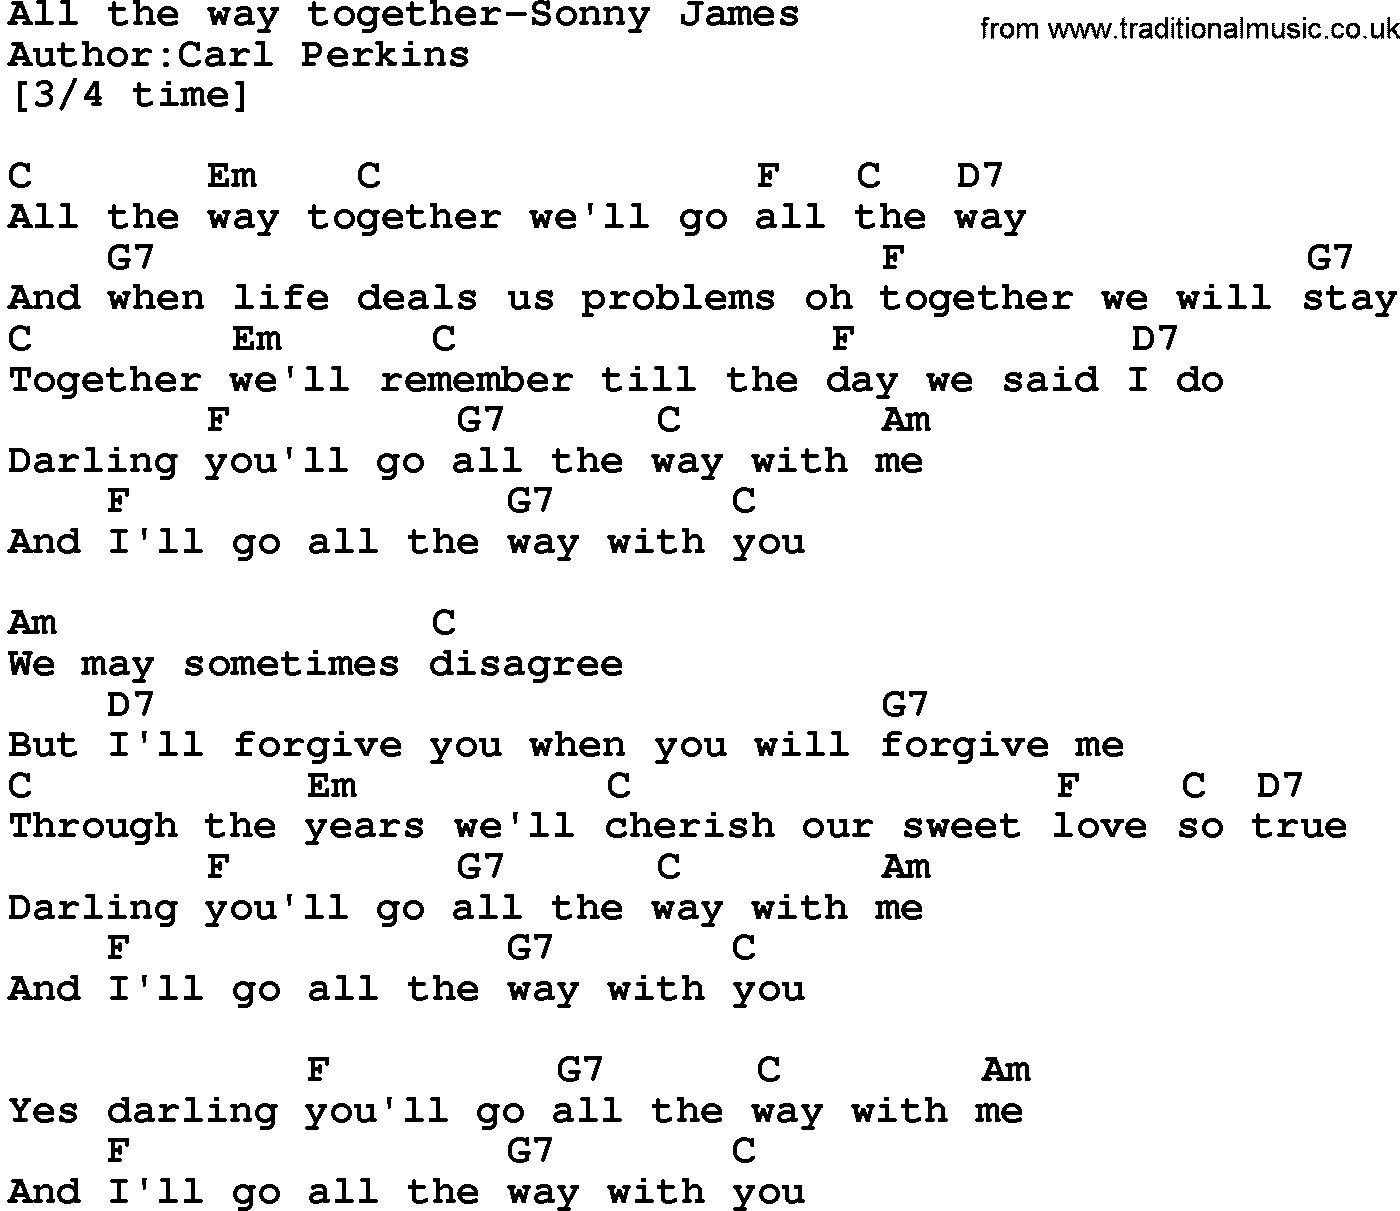 Country music song: All The Way Together-Sonny James lyrics and chords